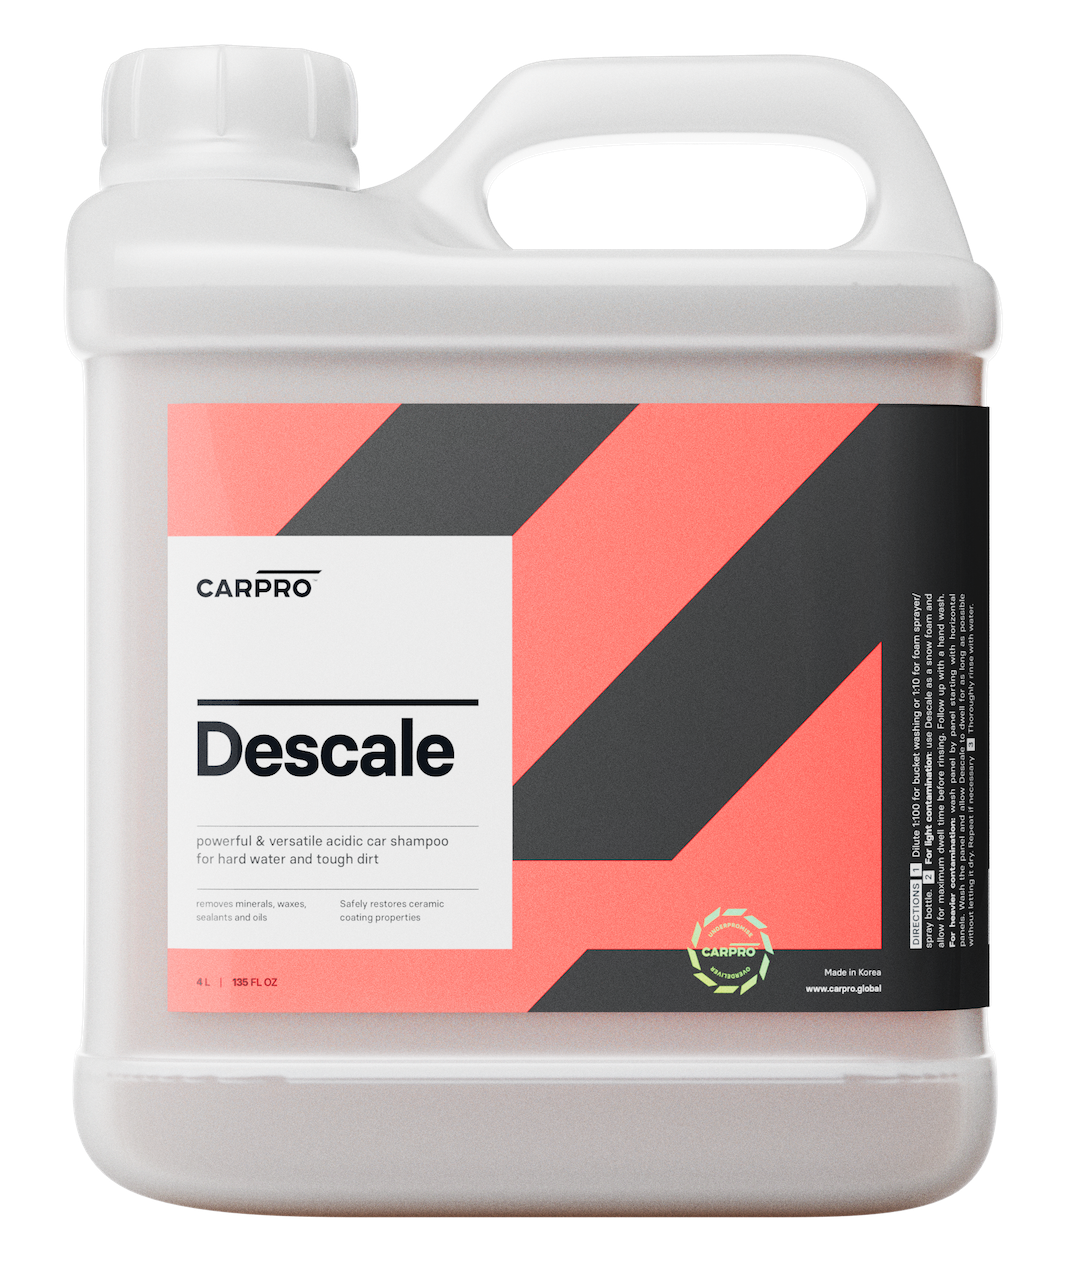 Carpro Descale now available at box of craving serusop A9, B117 & B118